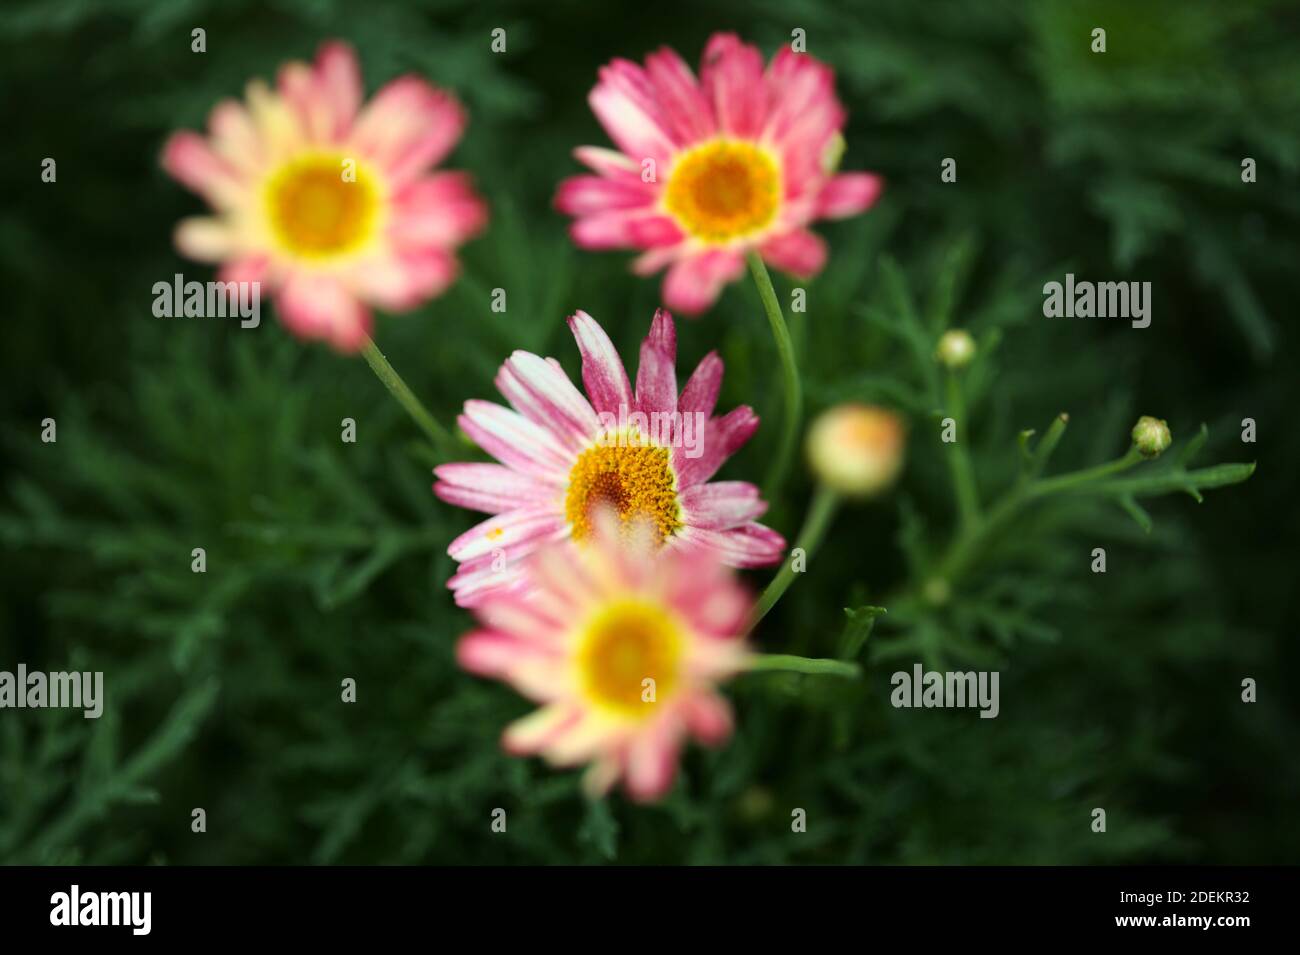 Natural macro background with marguerite daisies Stock Photo